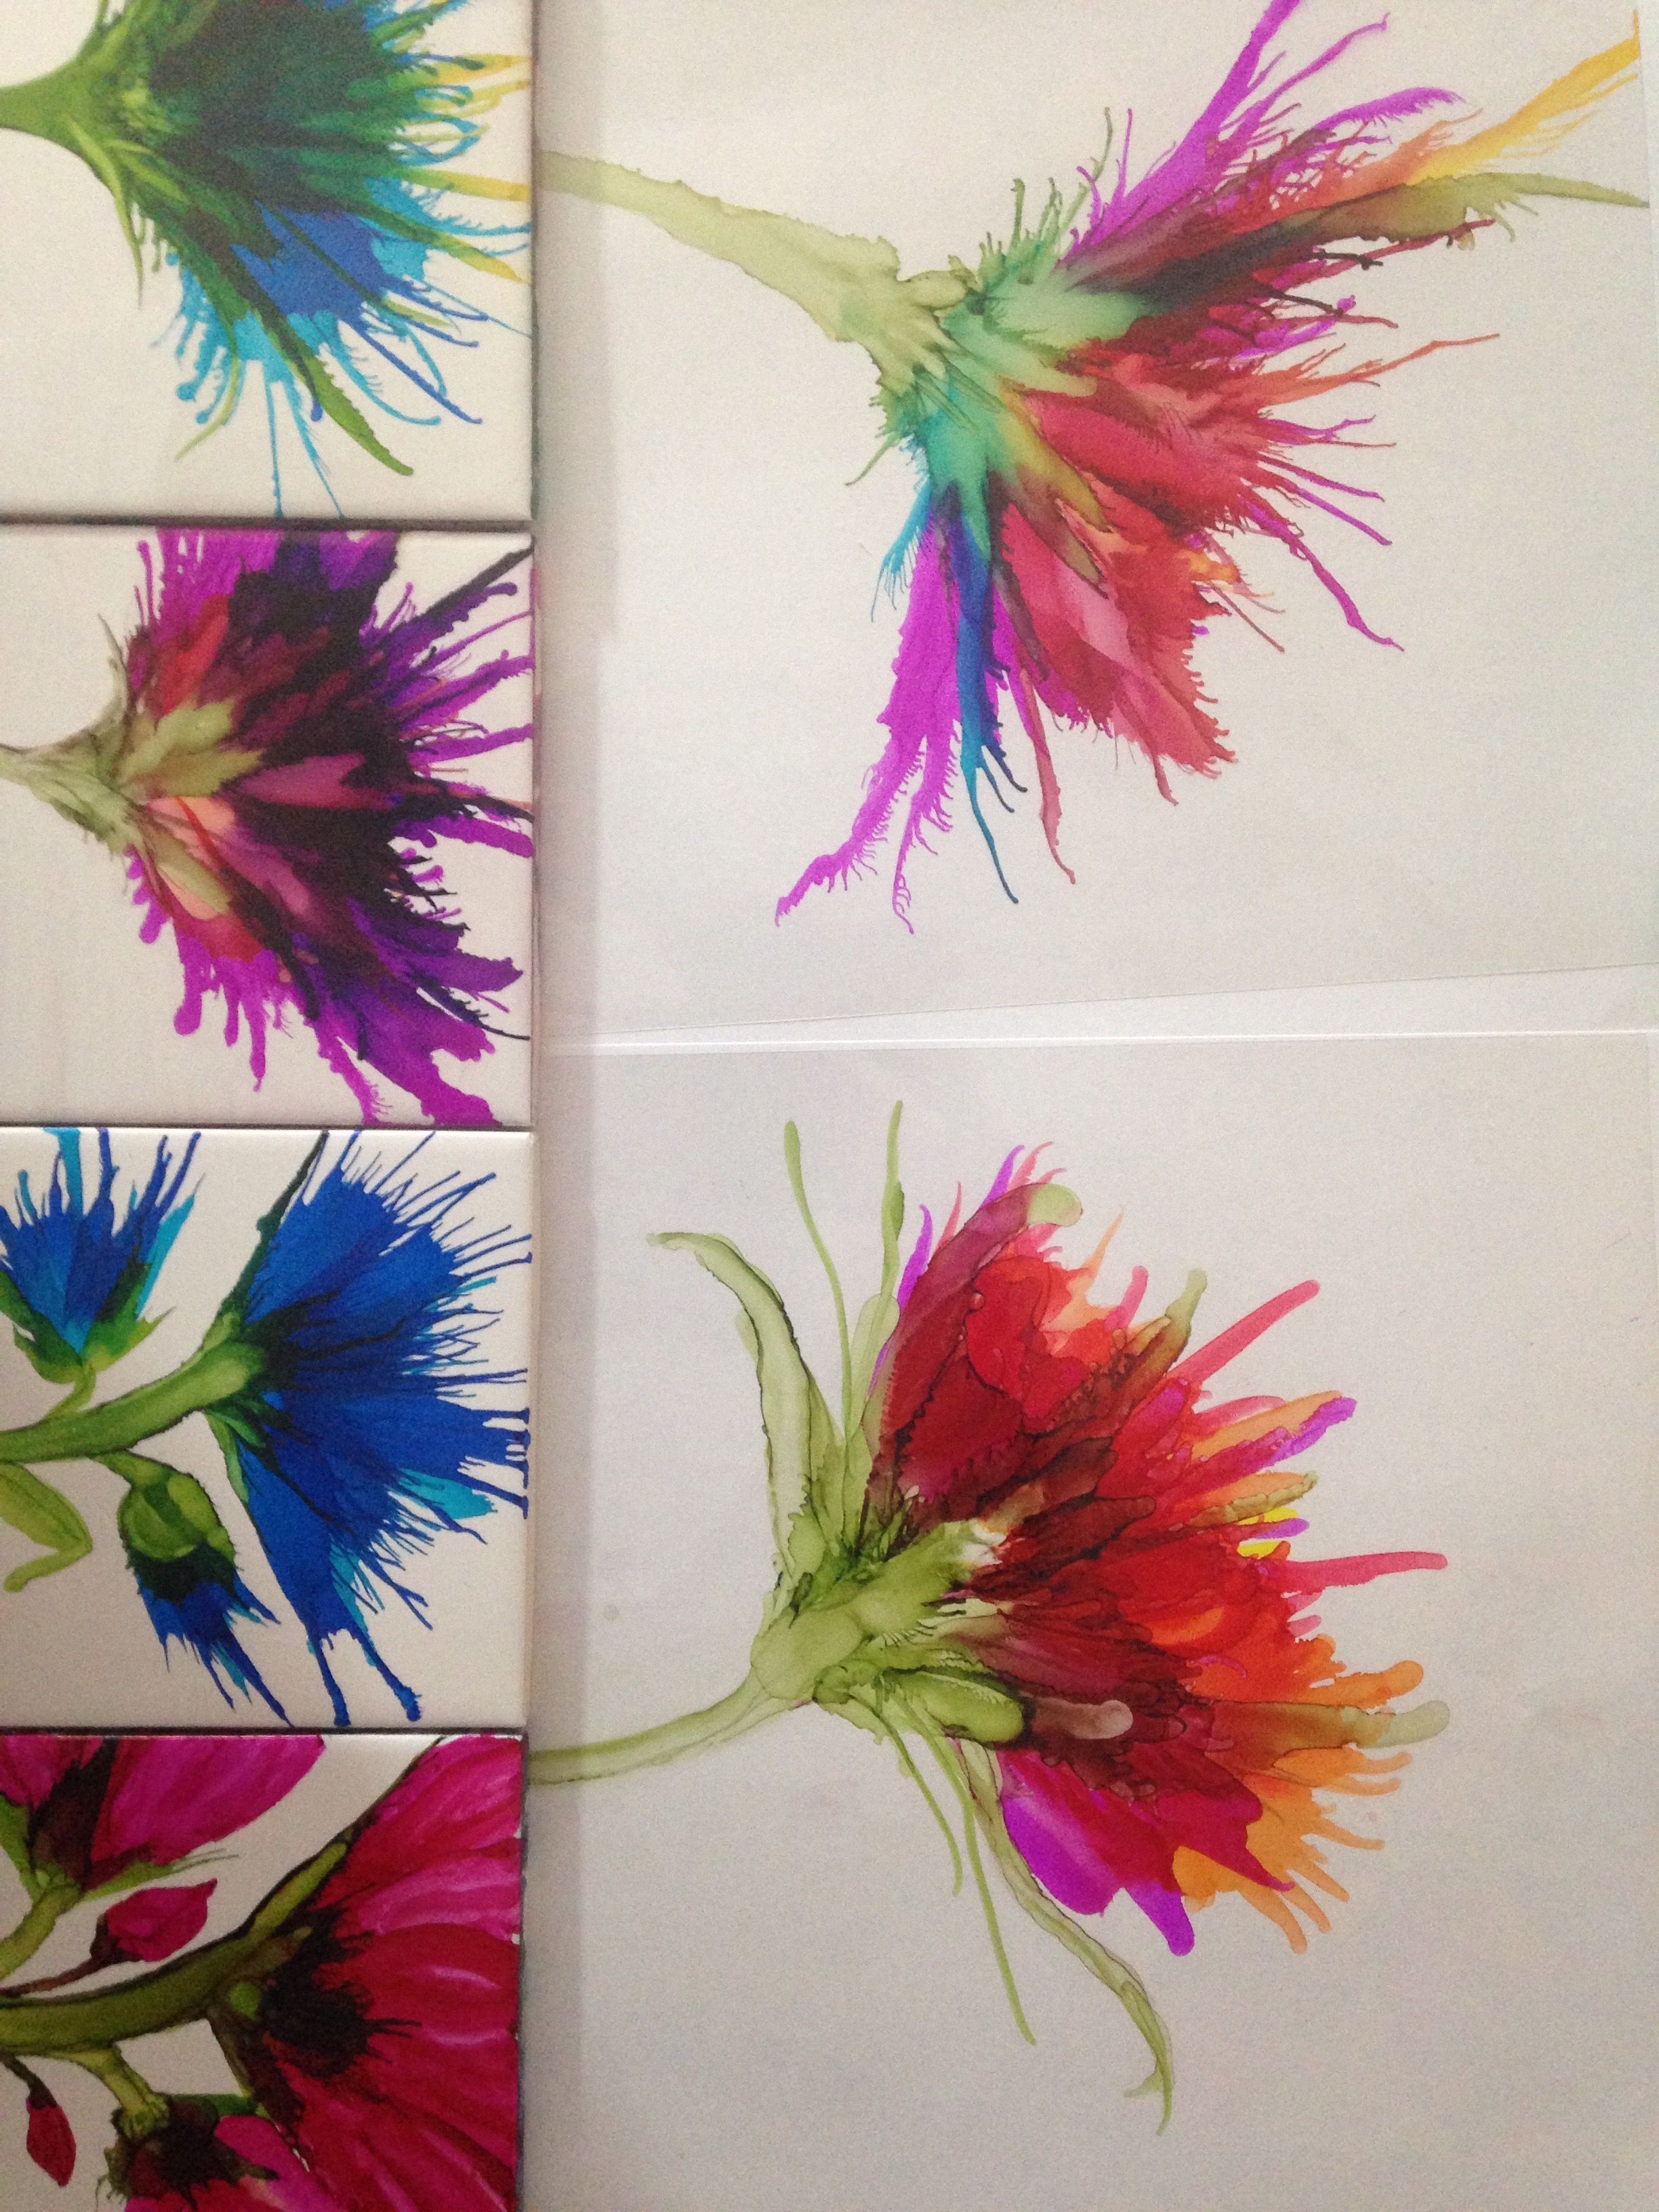 Working on alcohol ink flowers by Lin Crocco